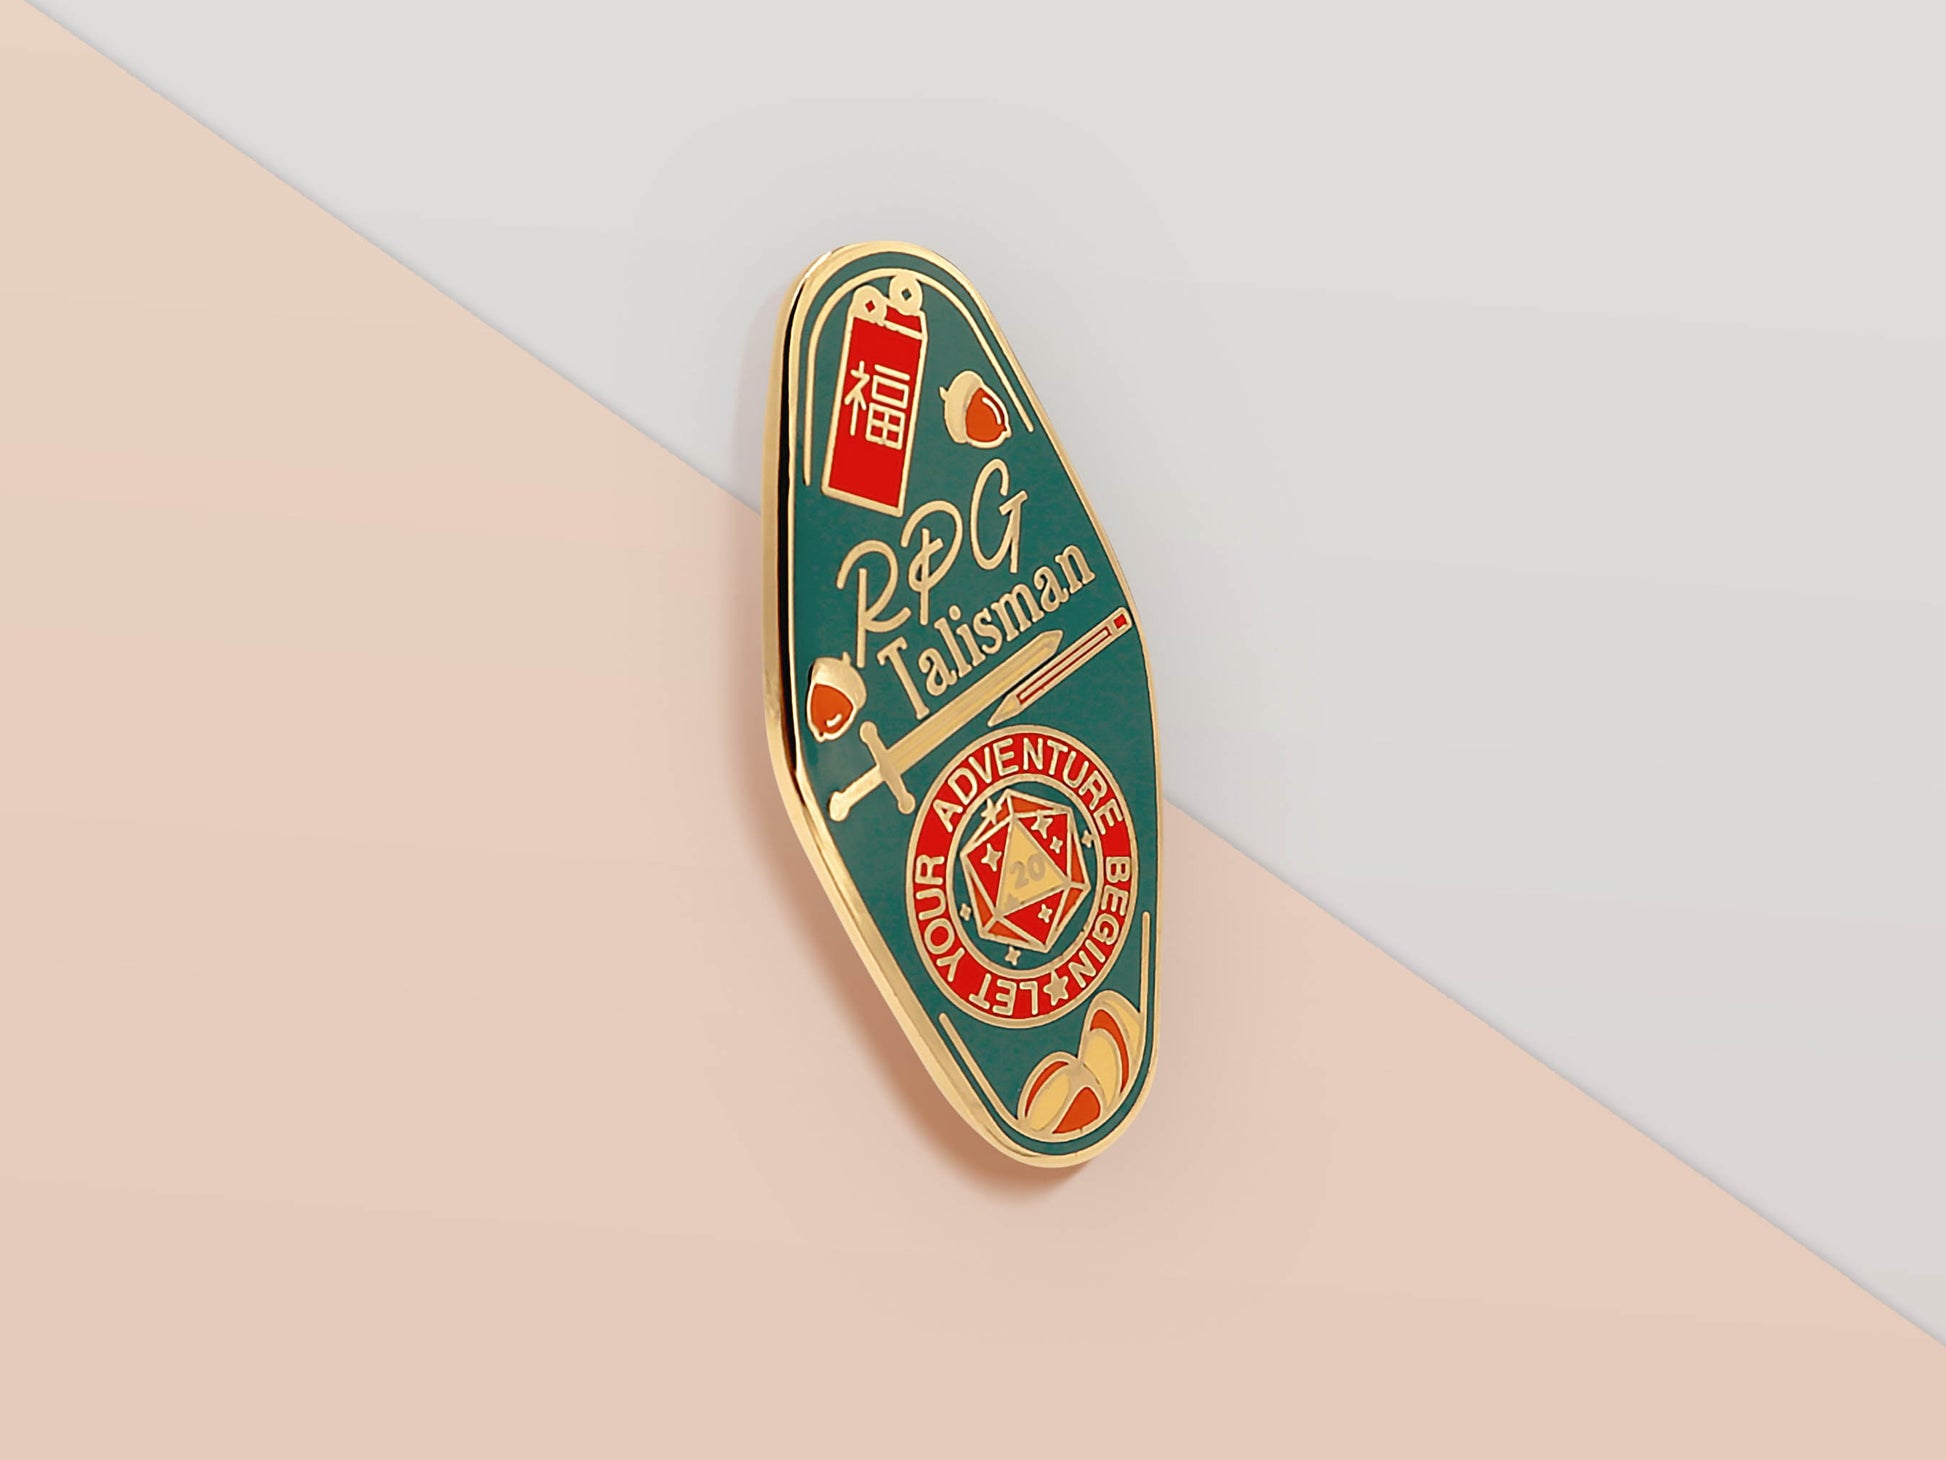 Gold Enamel Talisman Pin with red and blue design and the words RPG Talisman, Let Your Adventure Begin. The pins design includes a D20 dice and a sword and pencil, Hongbao red envelope, as well as acorns and crystals.